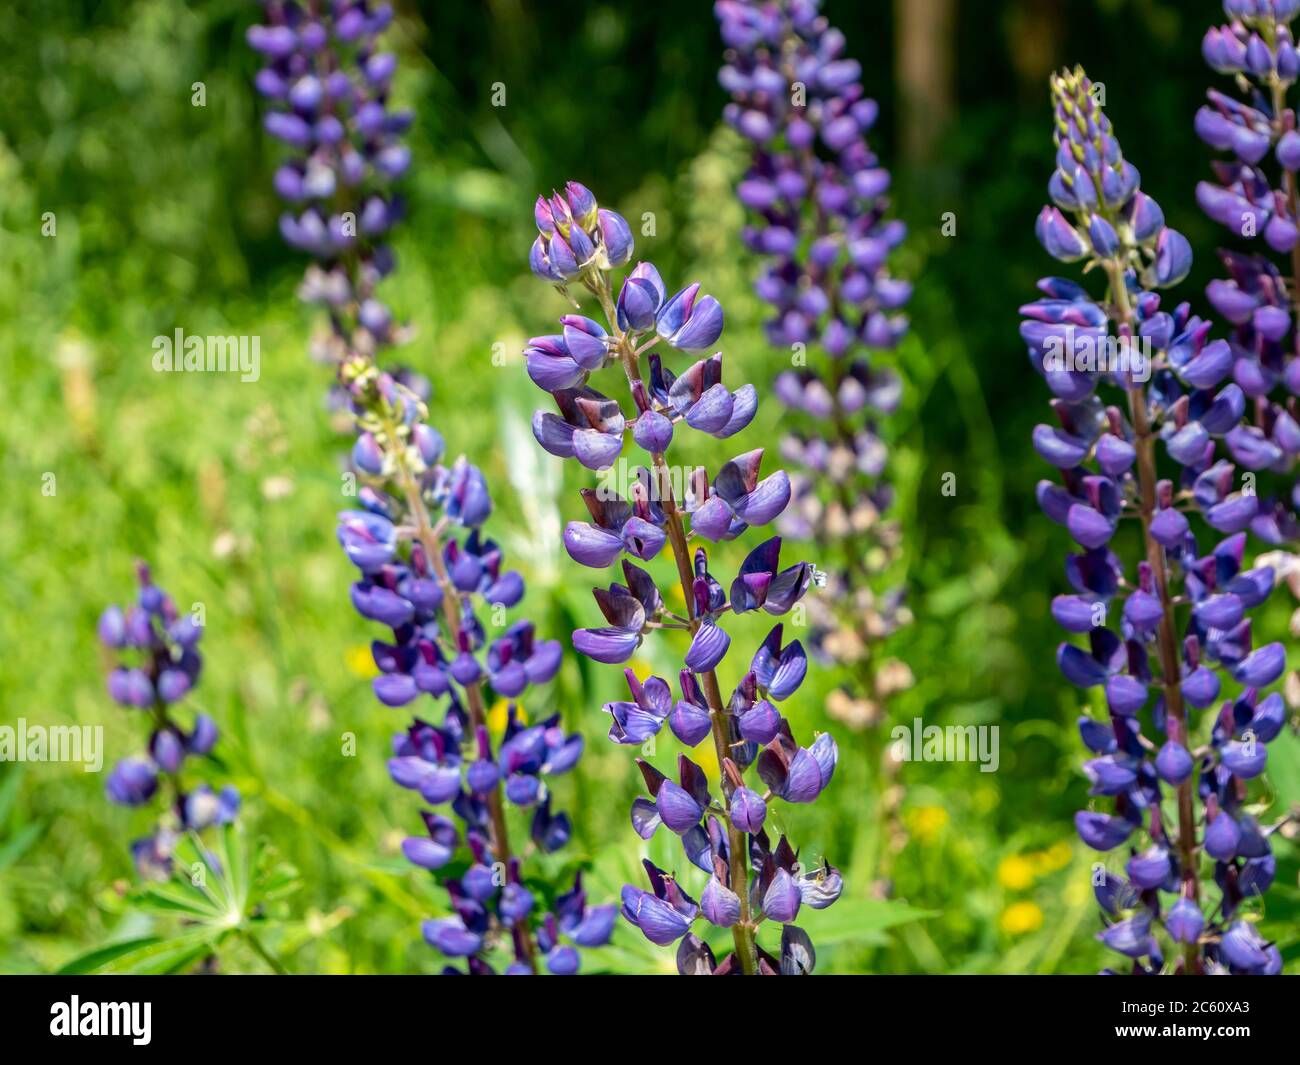 Perennial lupine Lupinus polyphyllus Lindl blooms in the garden Stock Photo